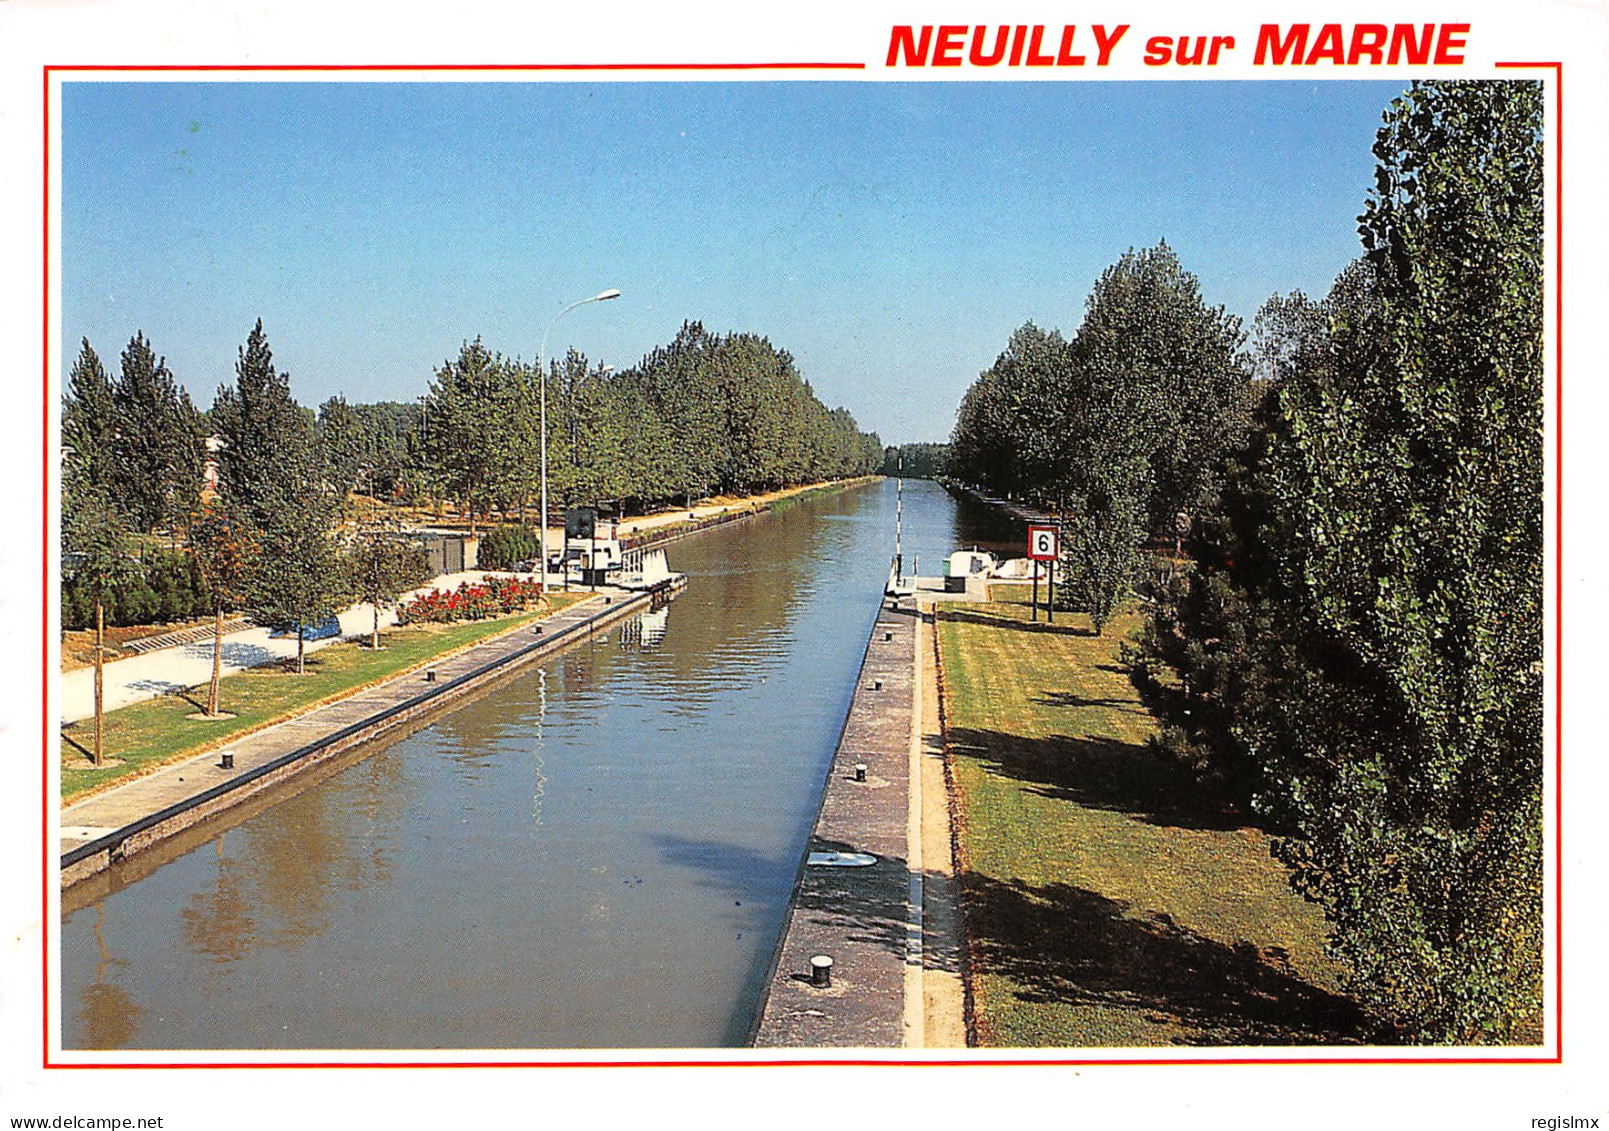 93-NEUILLY SUR MARNE-N°TB3550-B/0381 - Neuilly Sur Marne